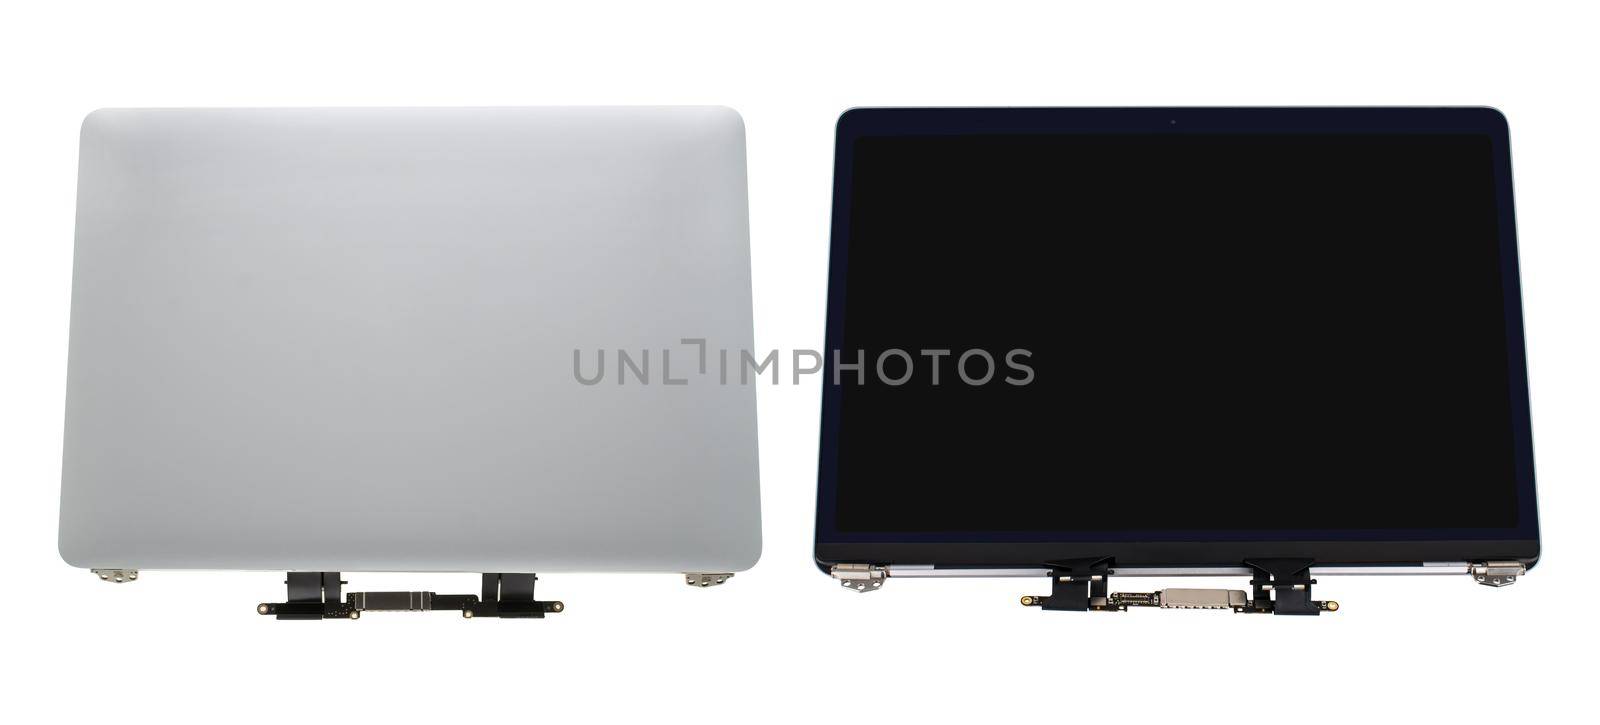 body parts for a laptop, a screen assembly for a laptop, a spare part for a computer, on a white background